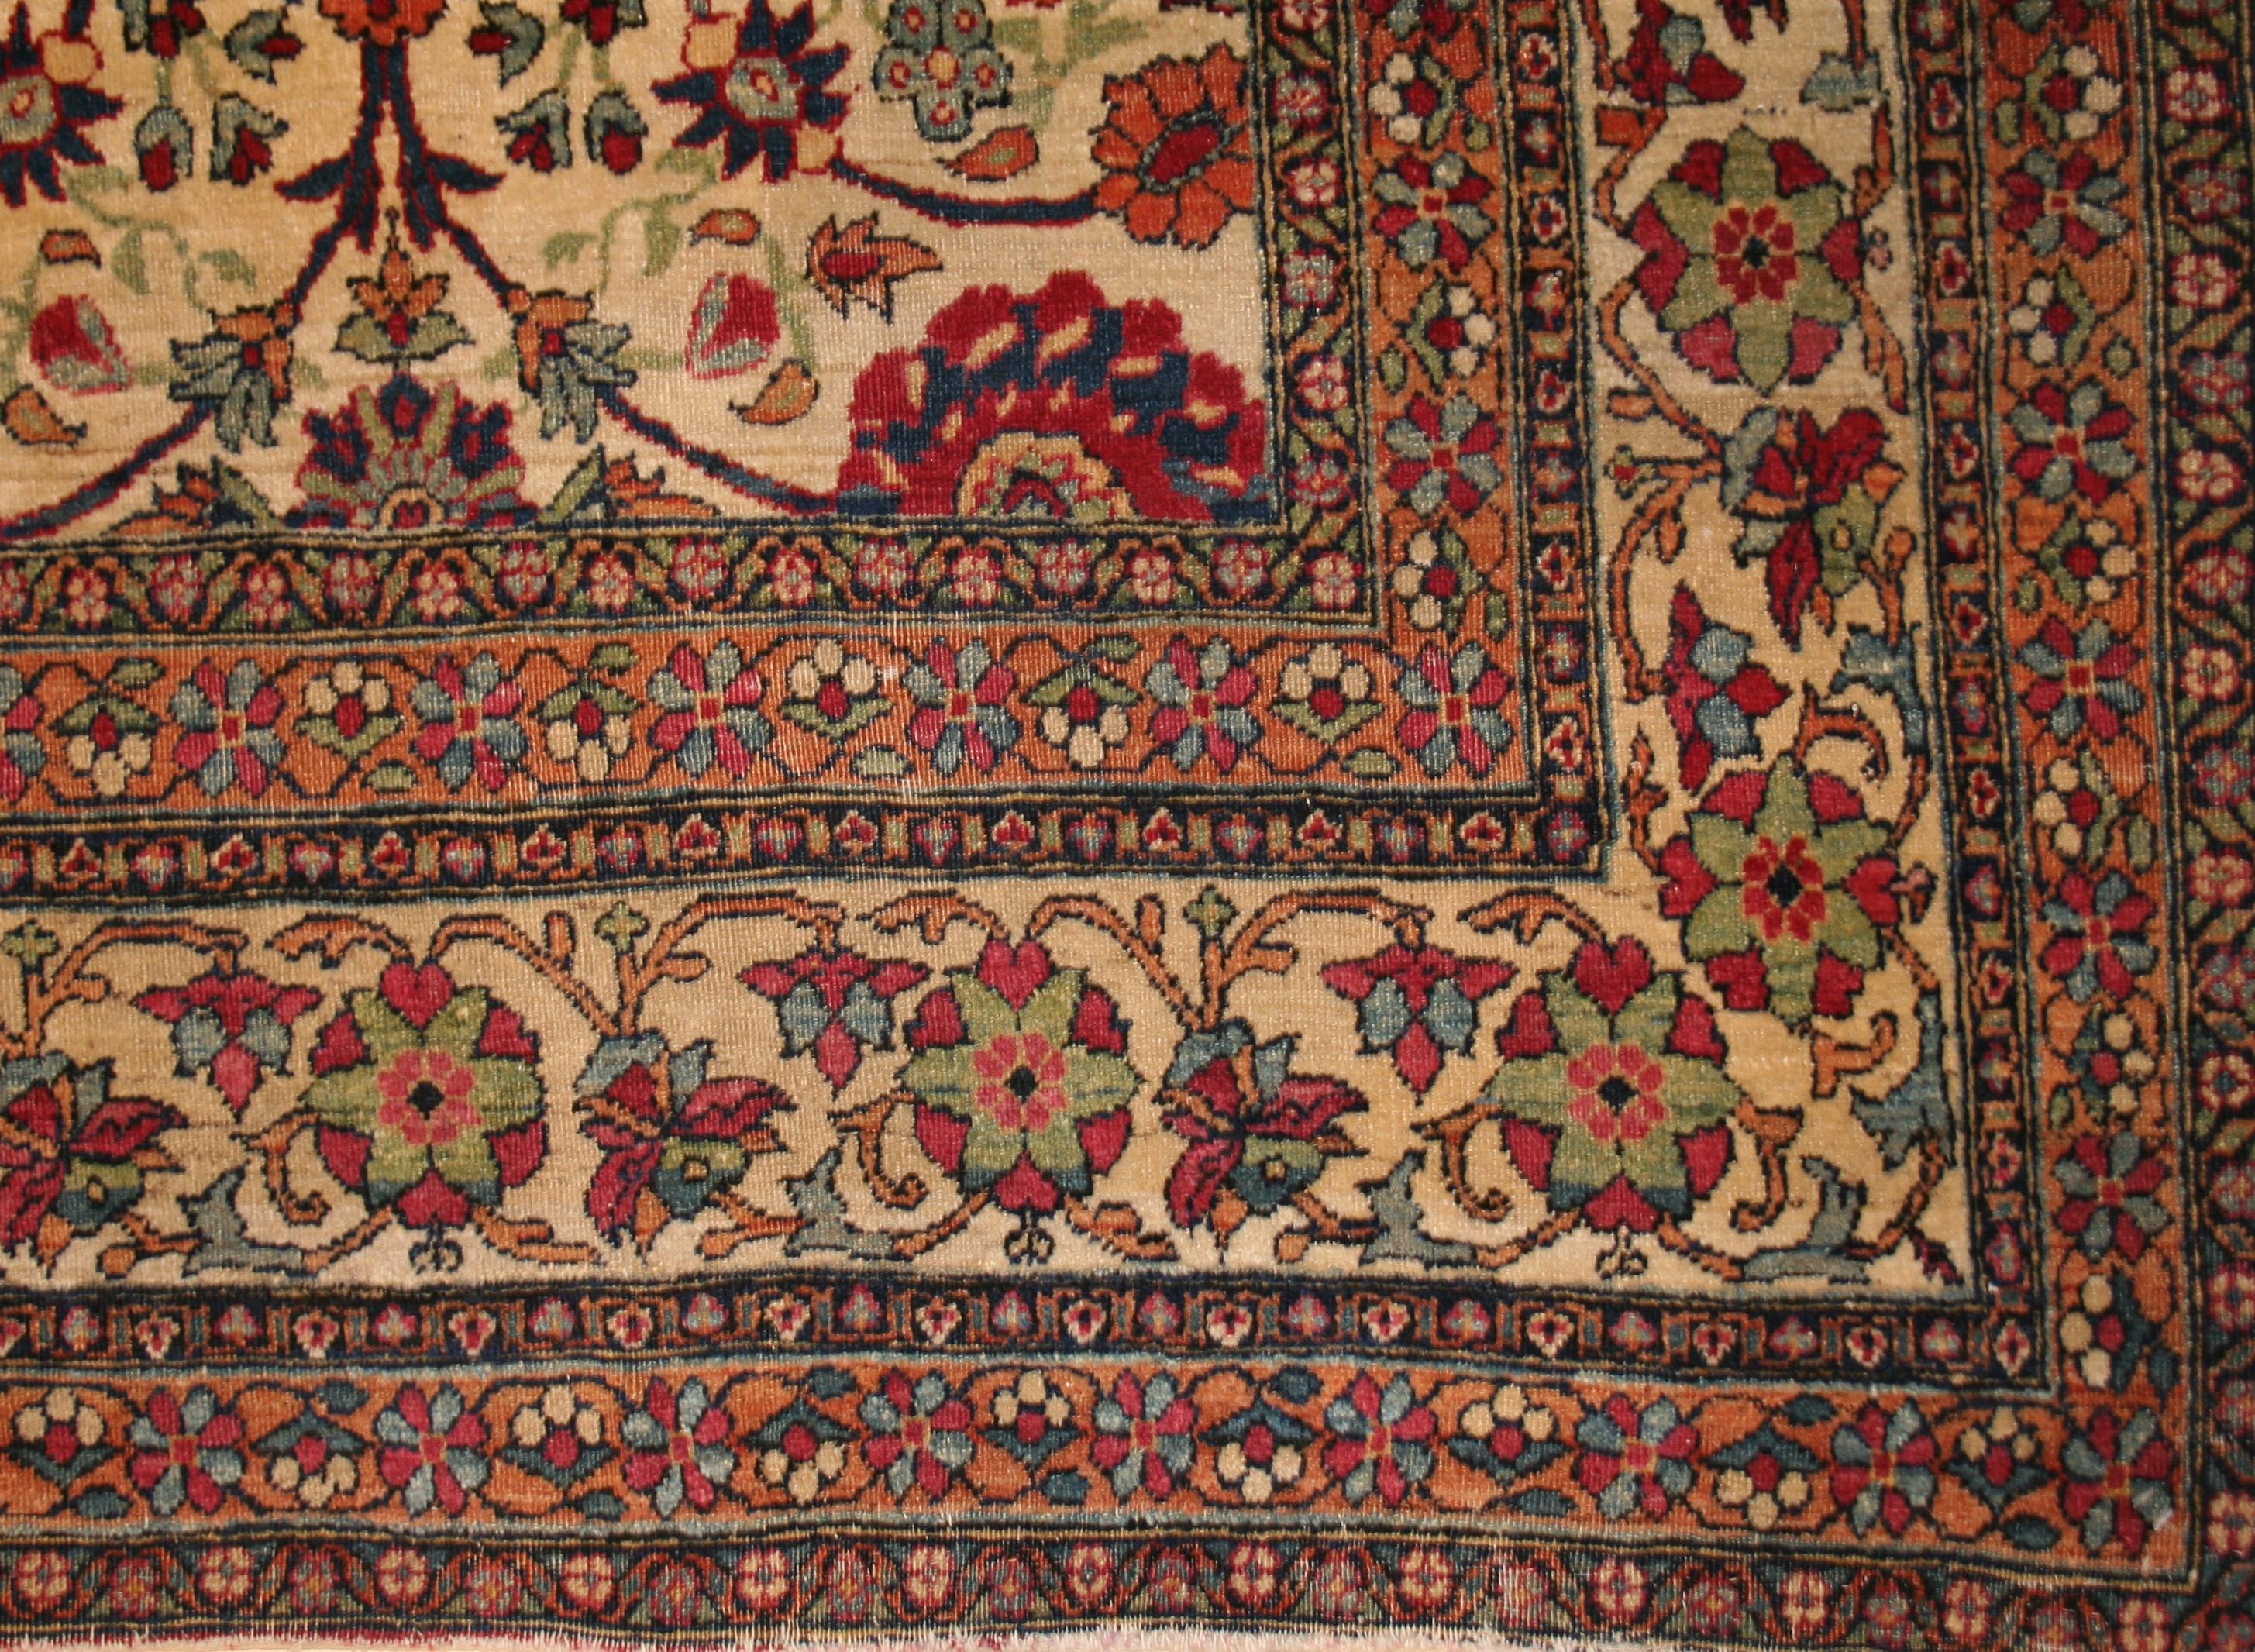 Sometimes referred to as Kermanshah in the trade, rugs of this type are the finest nineteenth-century workshop weavings from the city of Kerman. Exquisitely woven using the softest quality wool available, fine antique Lavar Kermans such as this